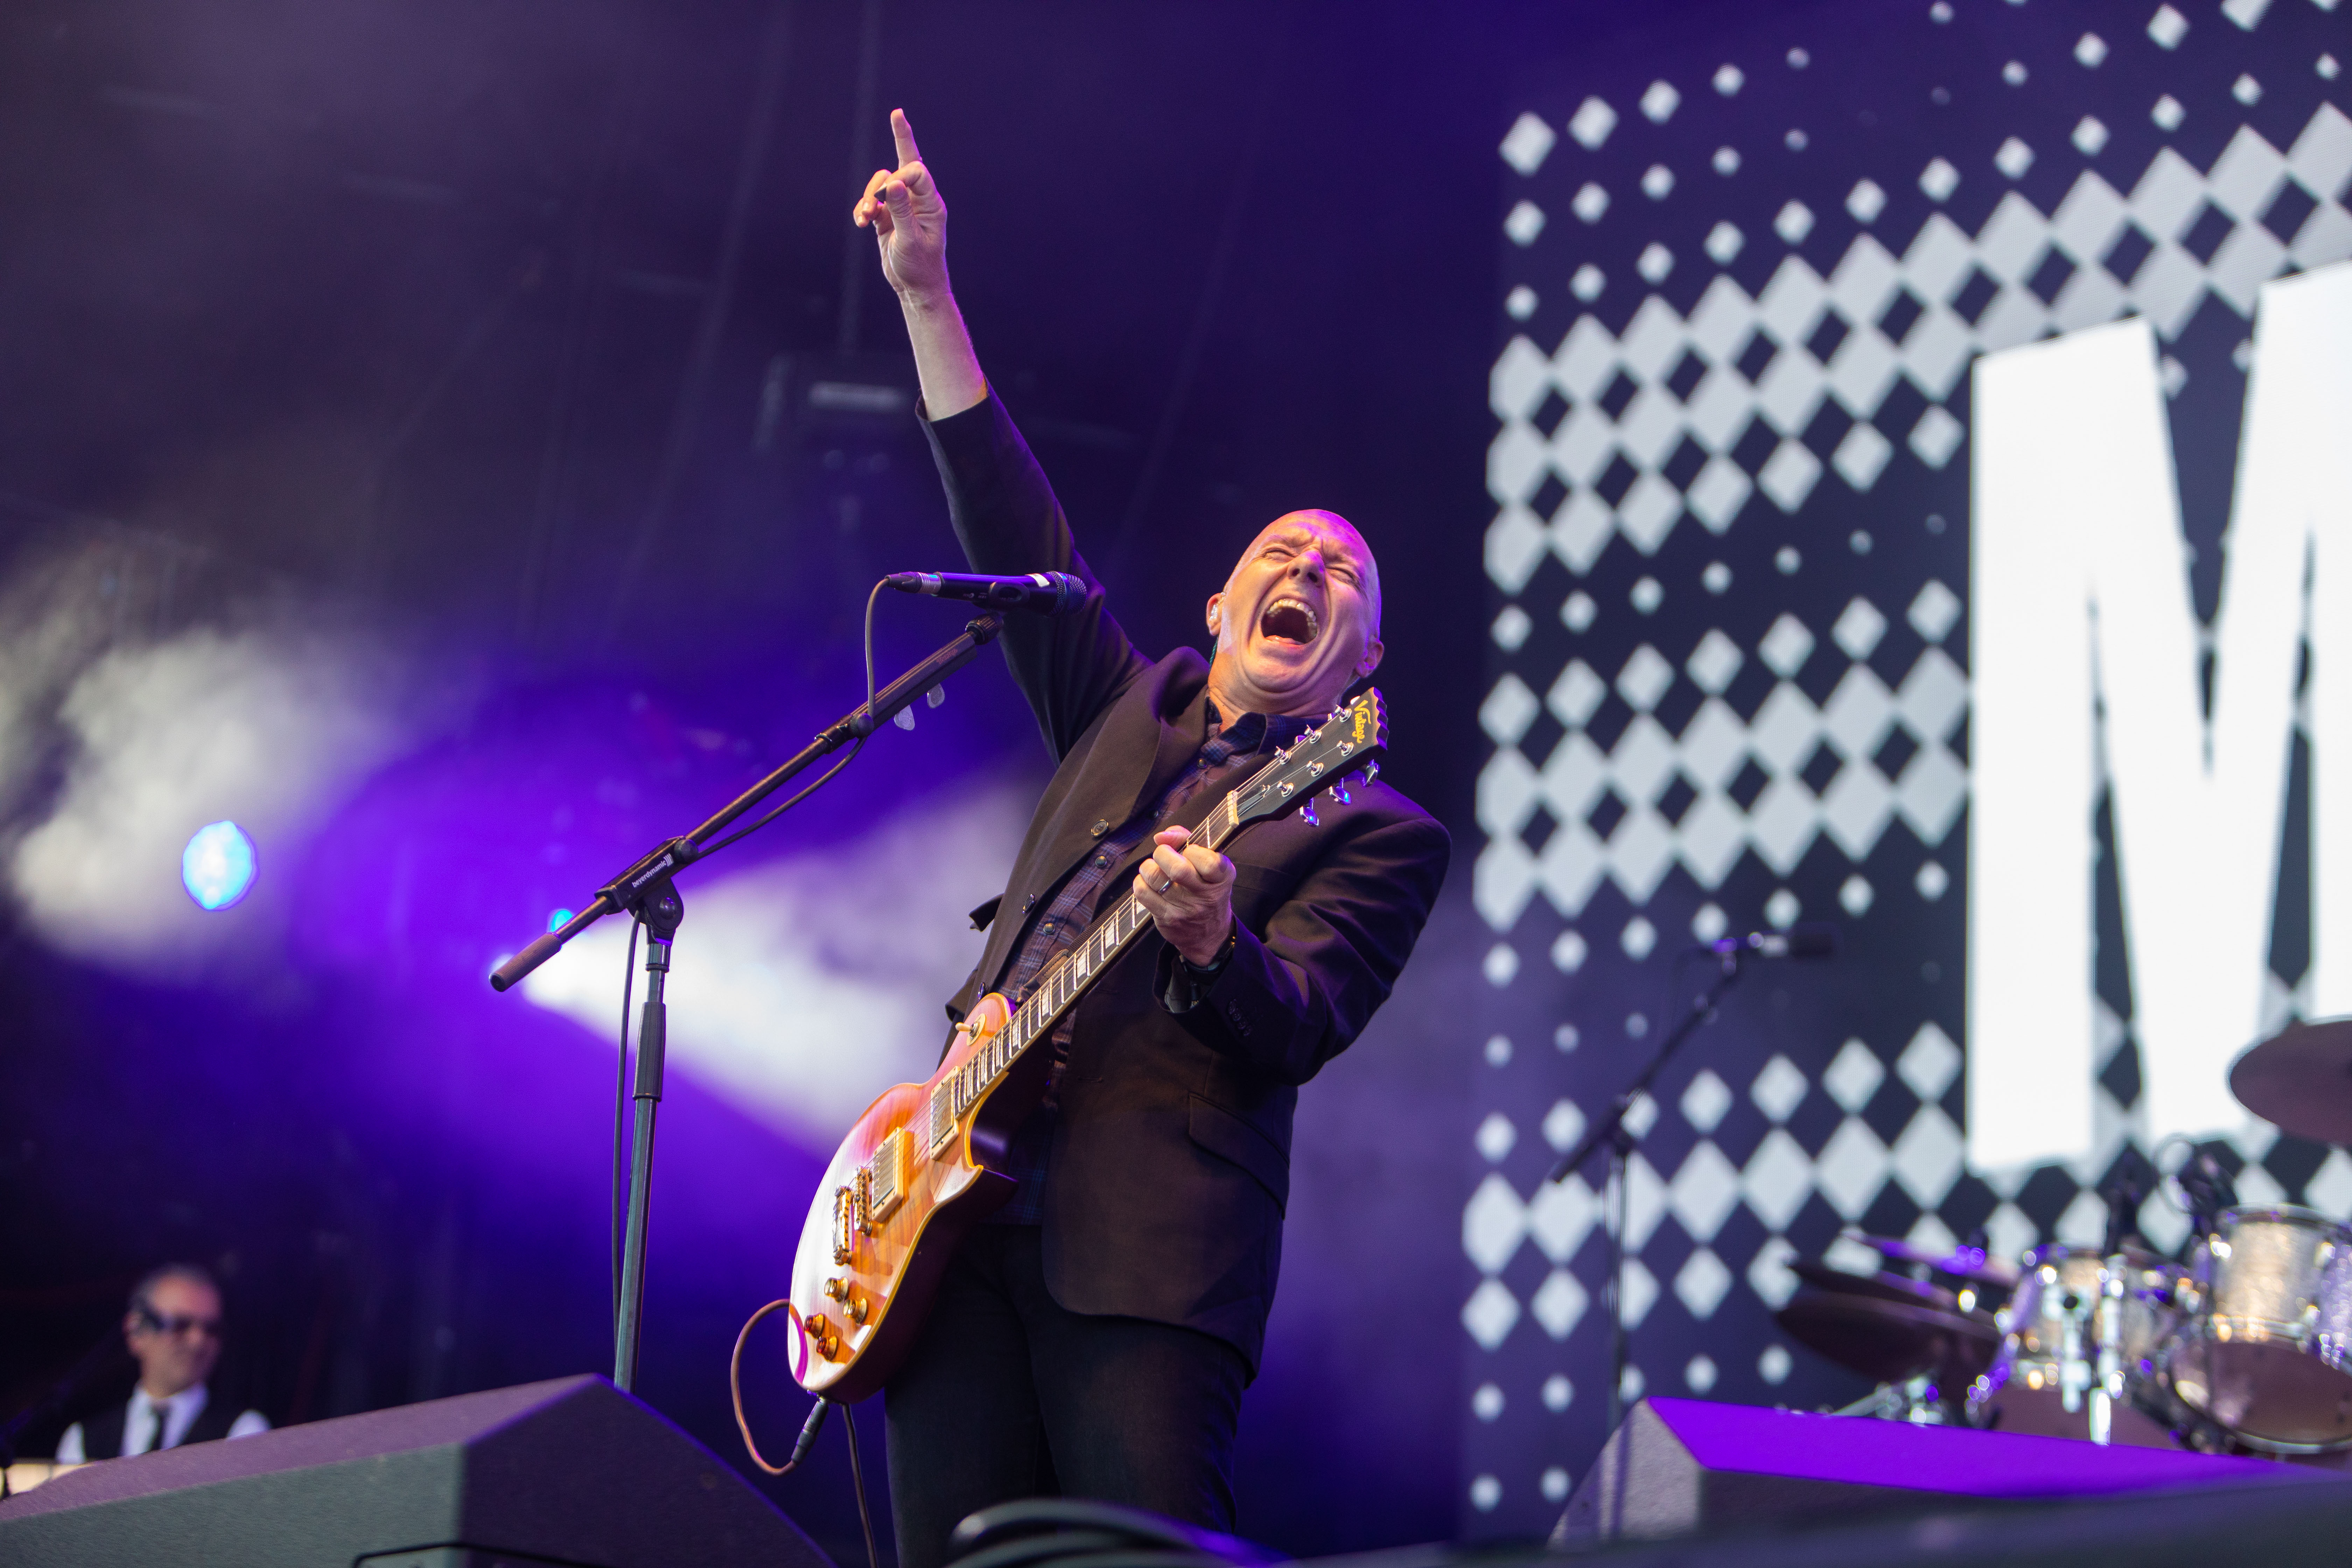 Midge Ure  performs at Rewind Festival 2018  - Sunday 22nd July 2018